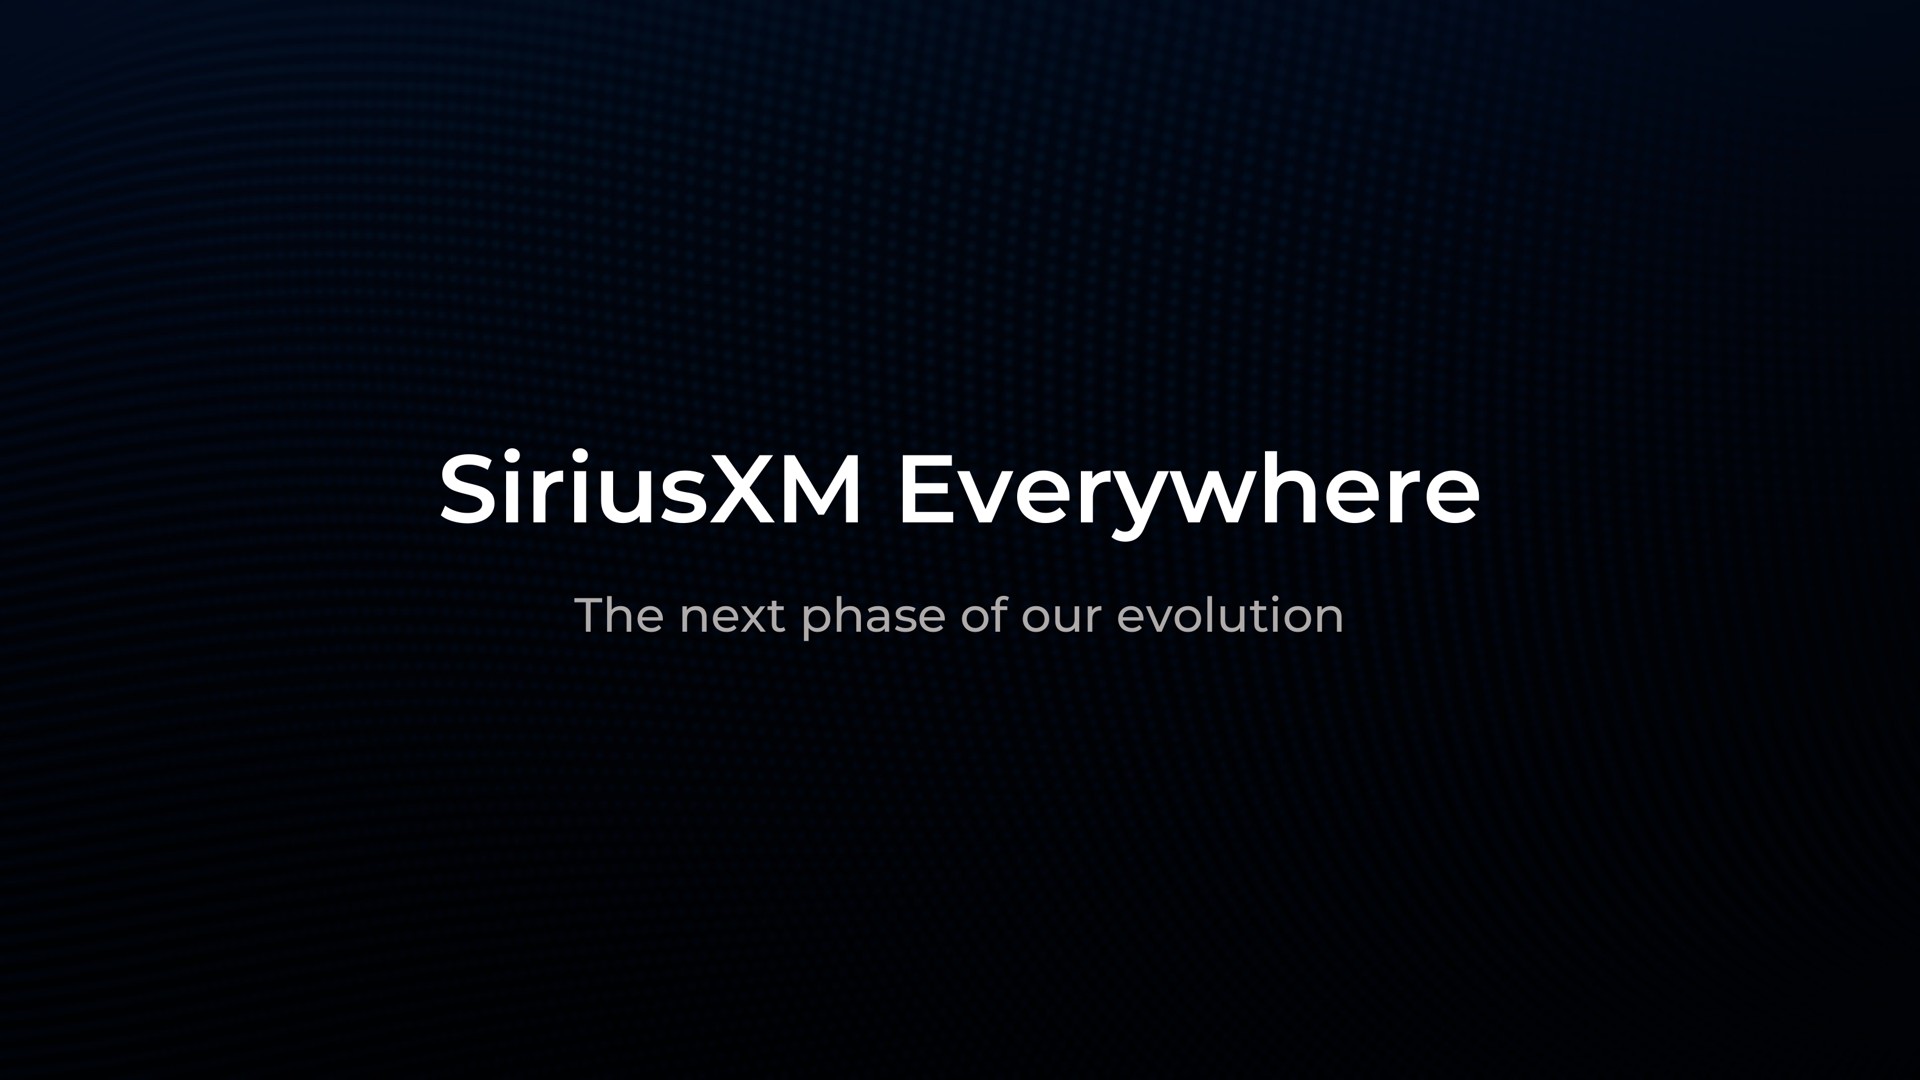 everywhere the next phase of our evolution | SiriusXM